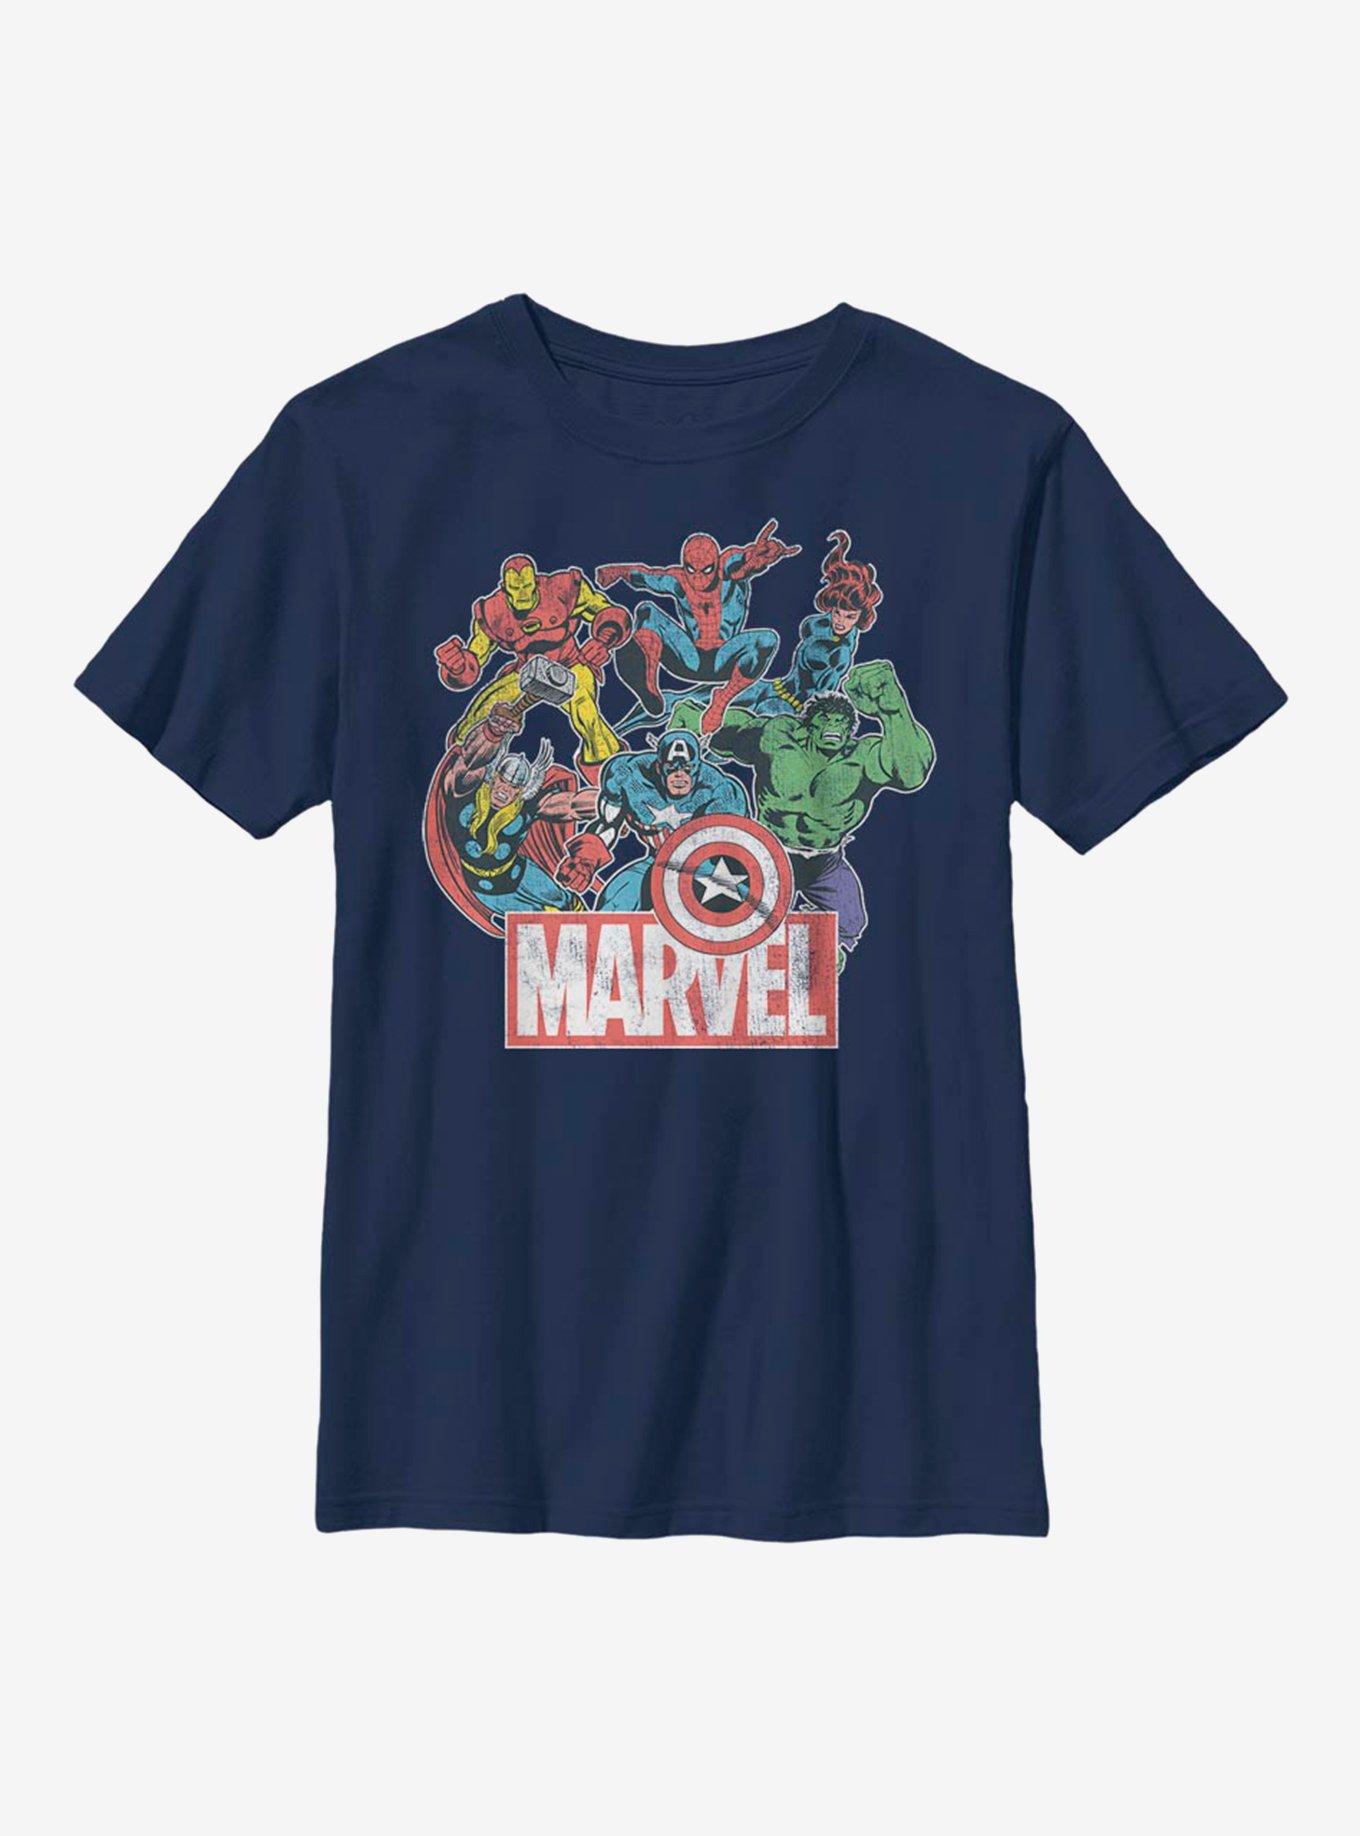 Marvel Avengers Heroes of Today Youth T-Shirt, NAVY, hi-res